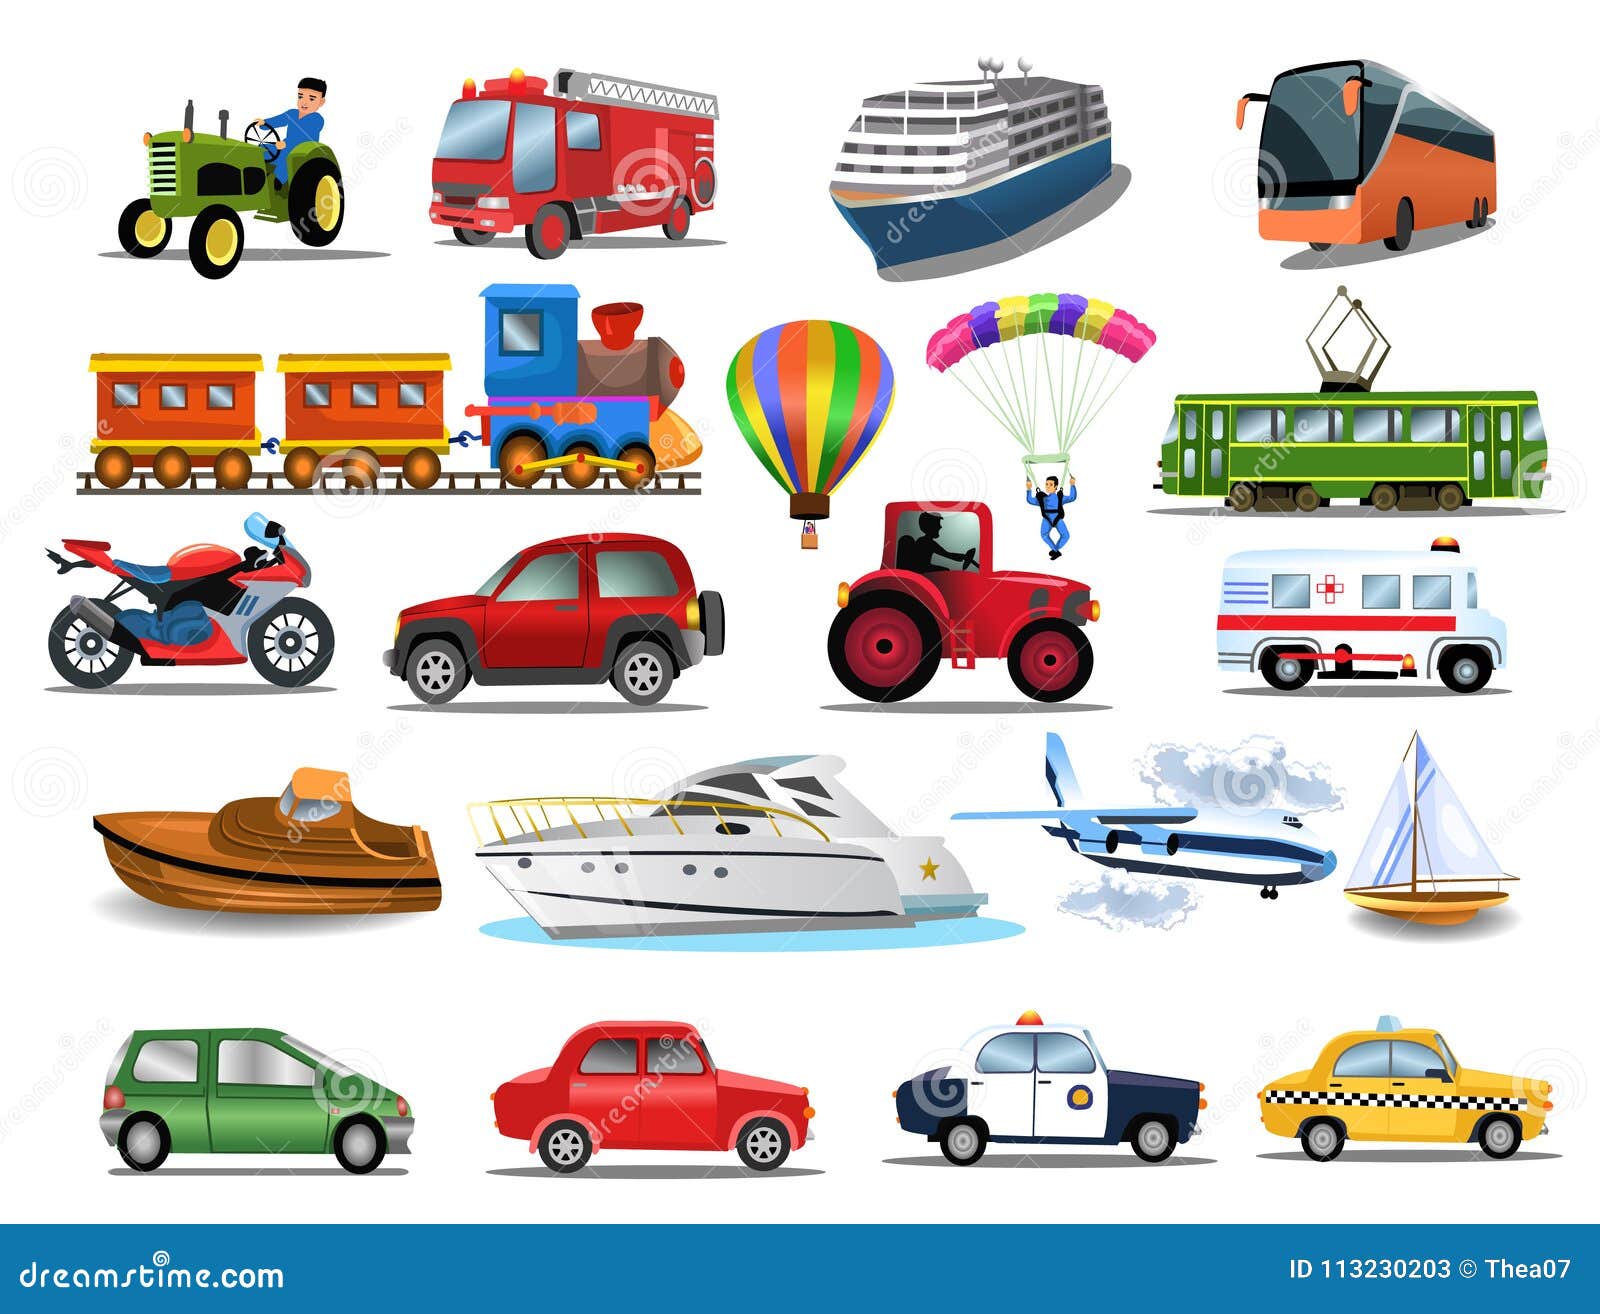 transportation icons collection  on a white background